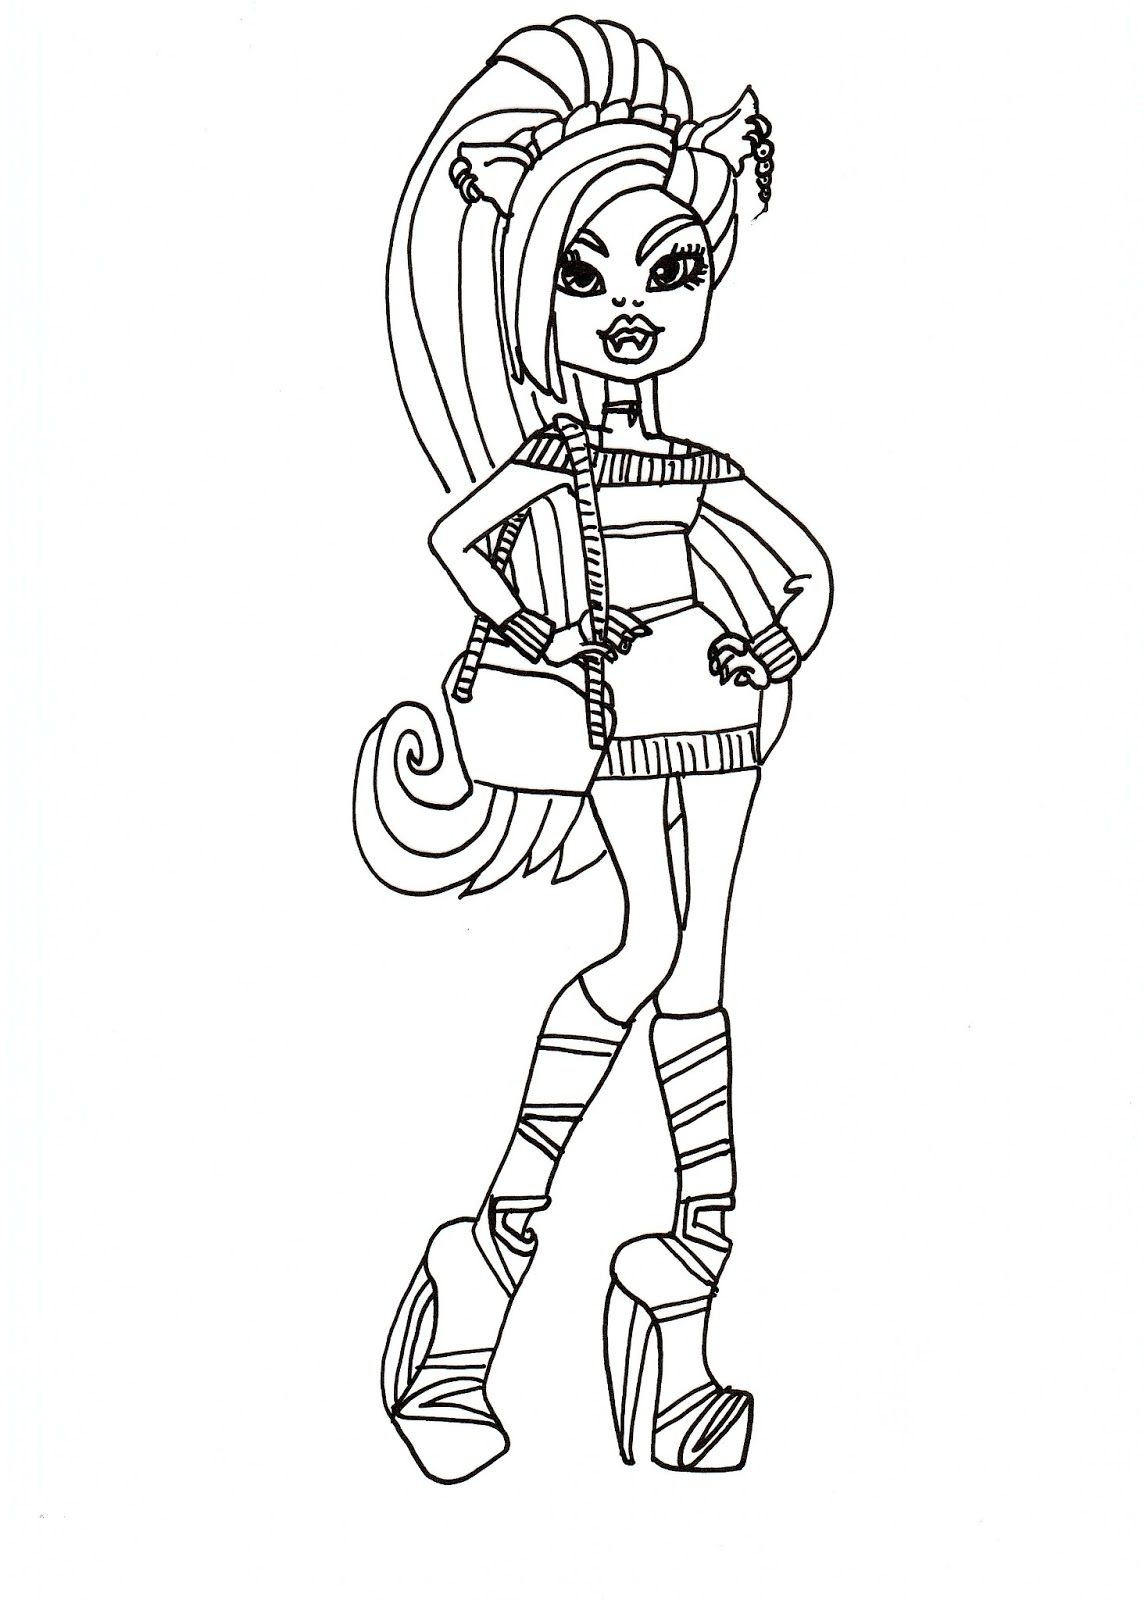 Monster High Clawdeen Coloring Pages at GetColorings.com | Free